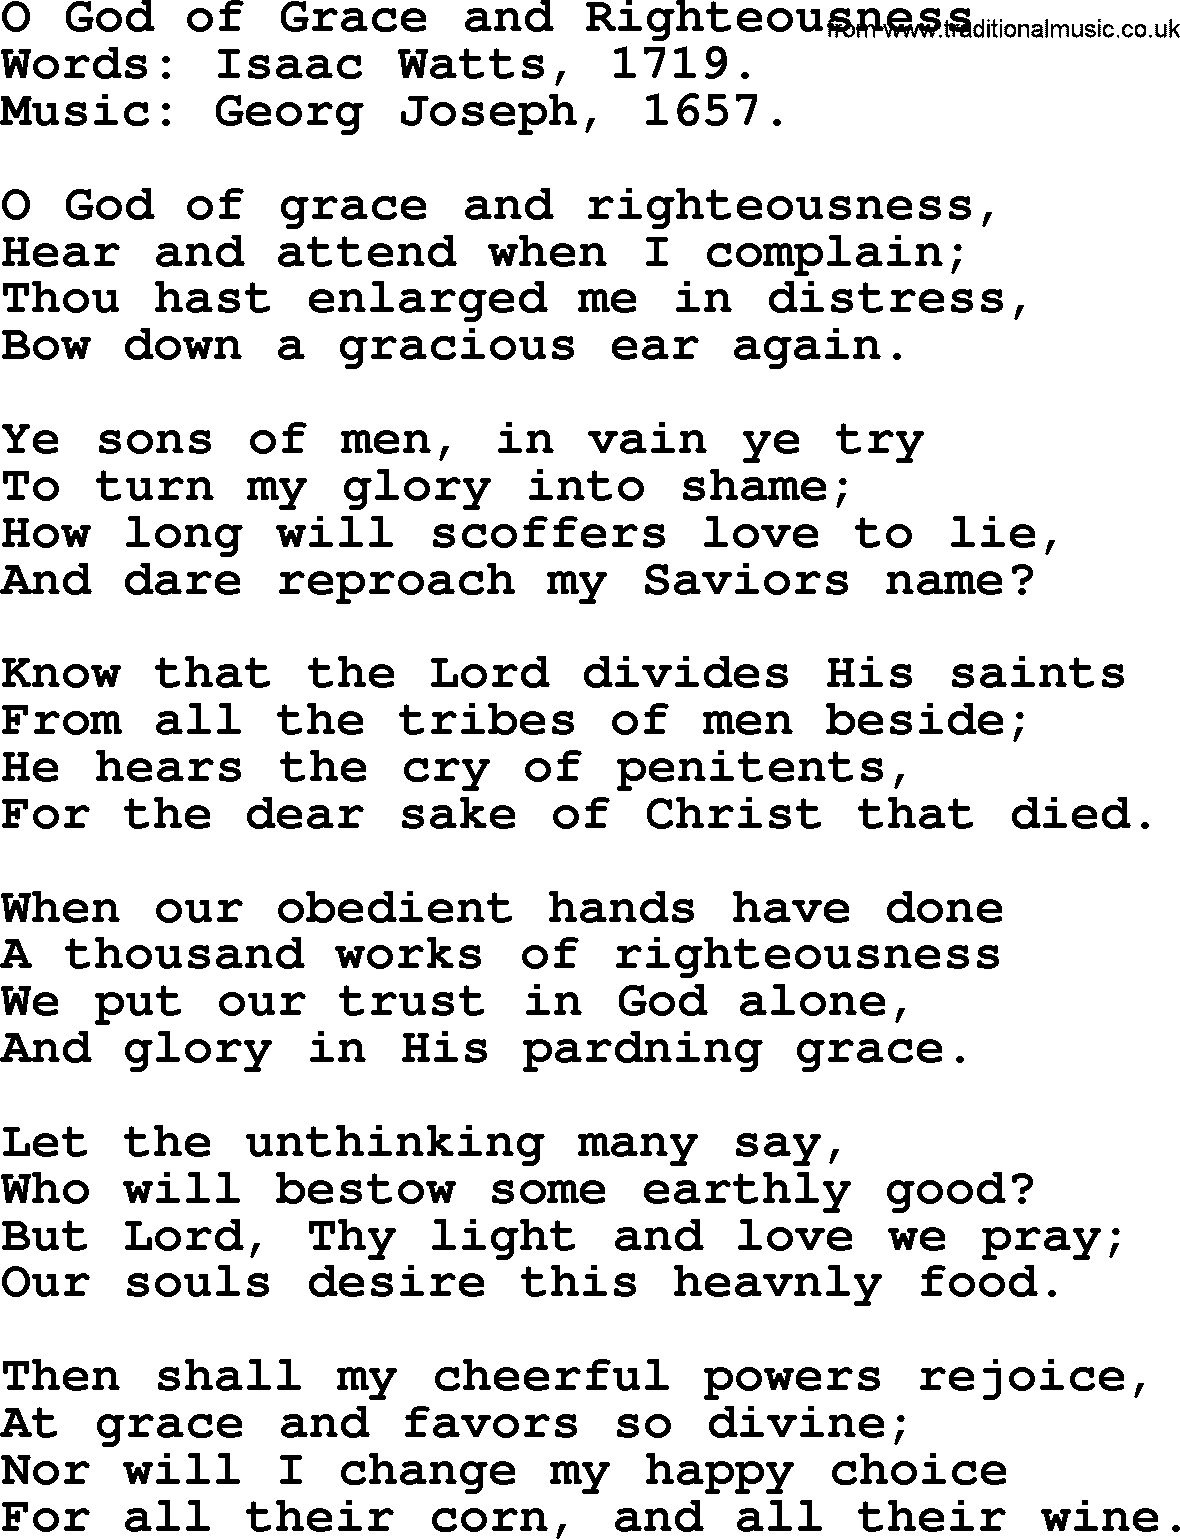 Isaac Watts Christian hymn: O God of Grace and Righteousness- lyricss